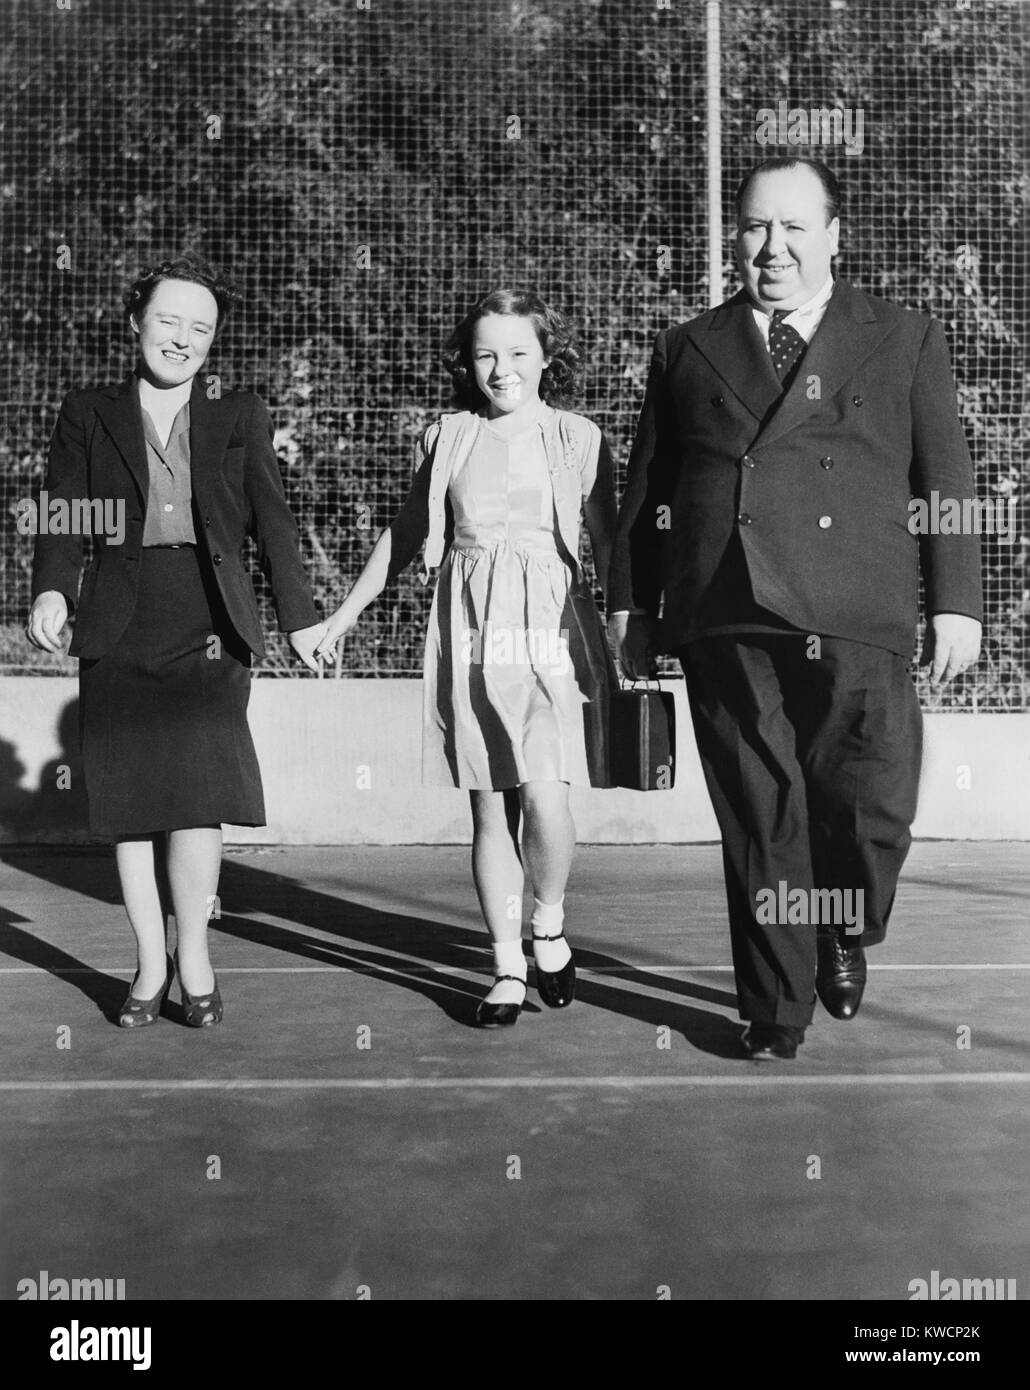 Alfred Hitchcock strolling about the grounds of his Bel Air estate. He is with his wife, Alma Reville, and his daughter, Patricia. Ca. 1942 - (BSLOC 2014 17 79) Stock Photo